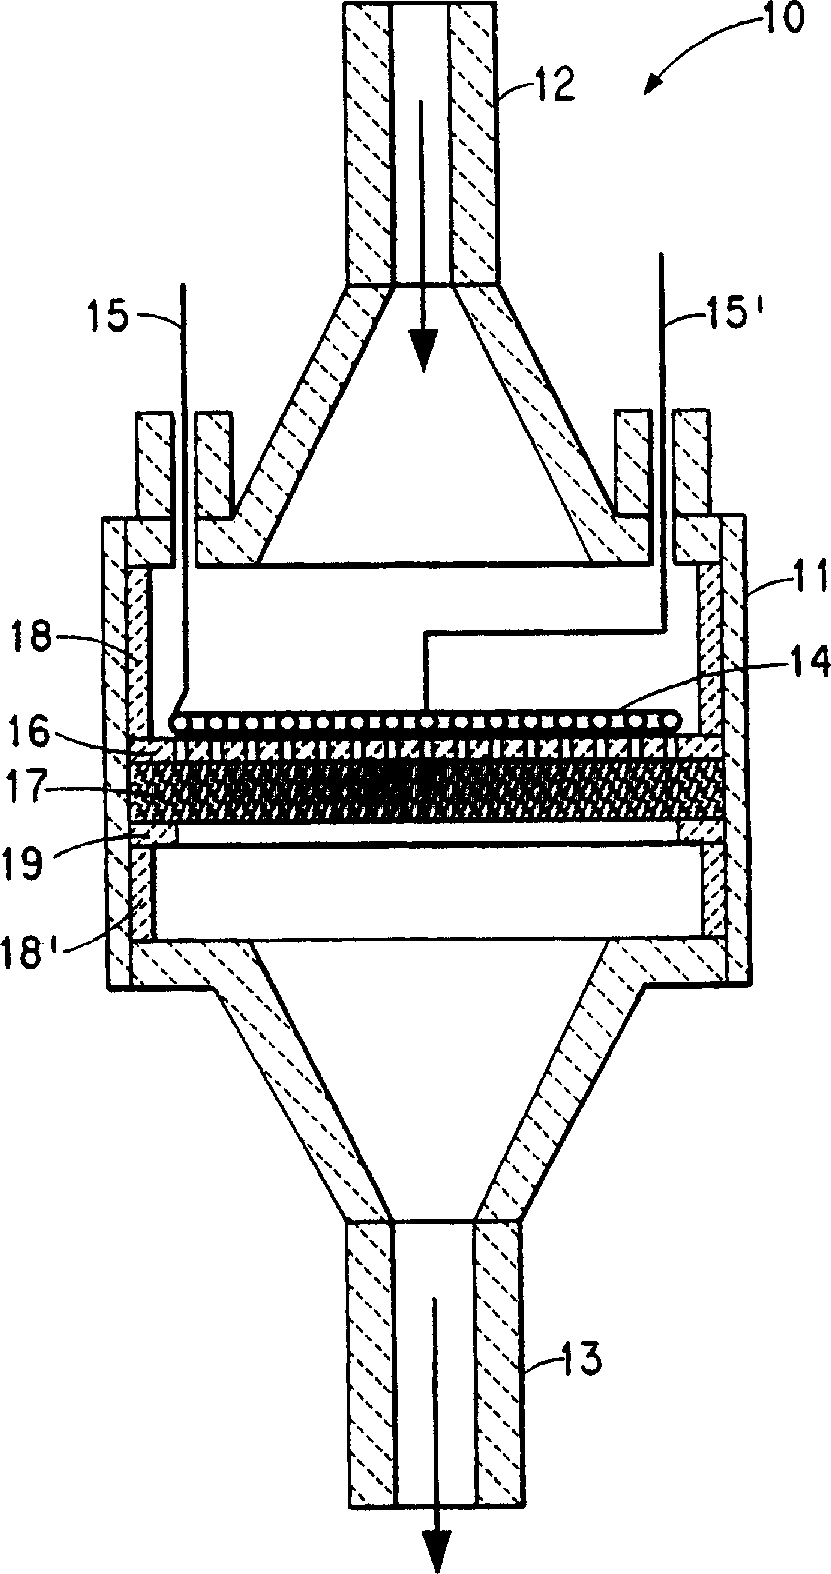 Inductively heated catalytic reactor